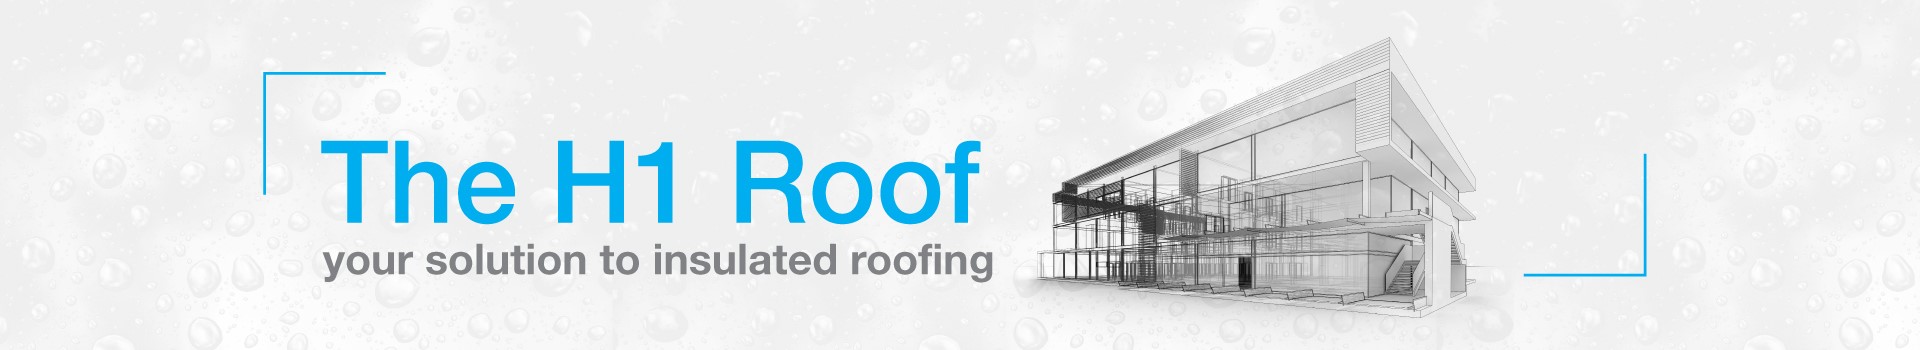 Viking Releases New Warm Roof System that Exceeds H1 Requirements